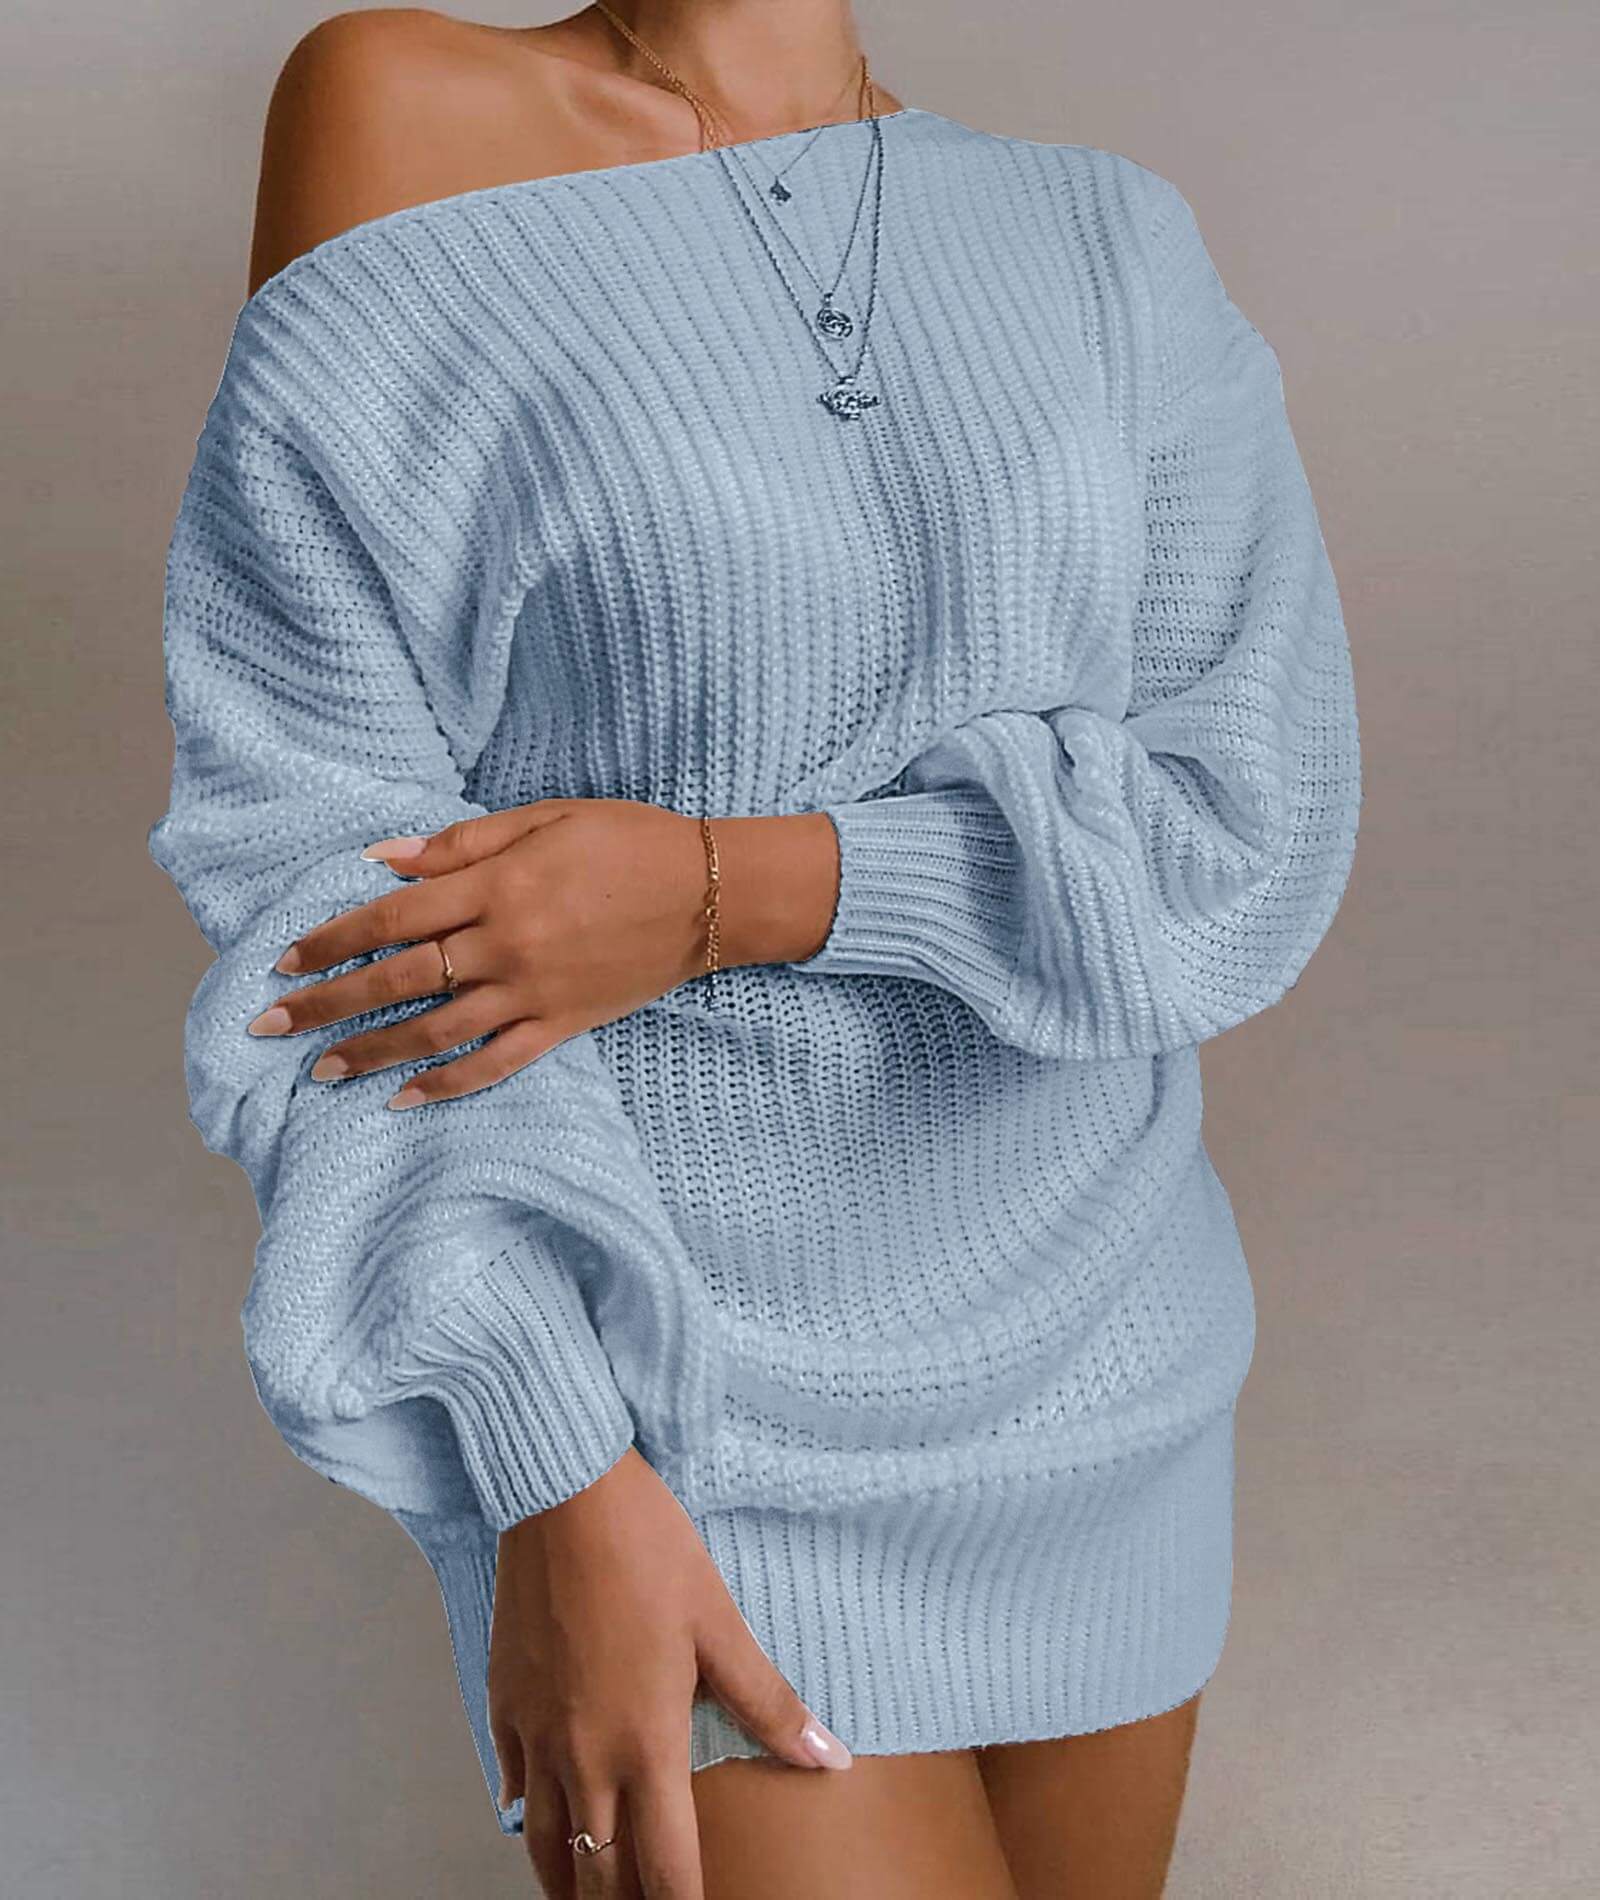  Women's Casual Oversized Off Shoulder Sweater Dresses Long Batwing Sleeve Chunky Pullover Jumper Tops